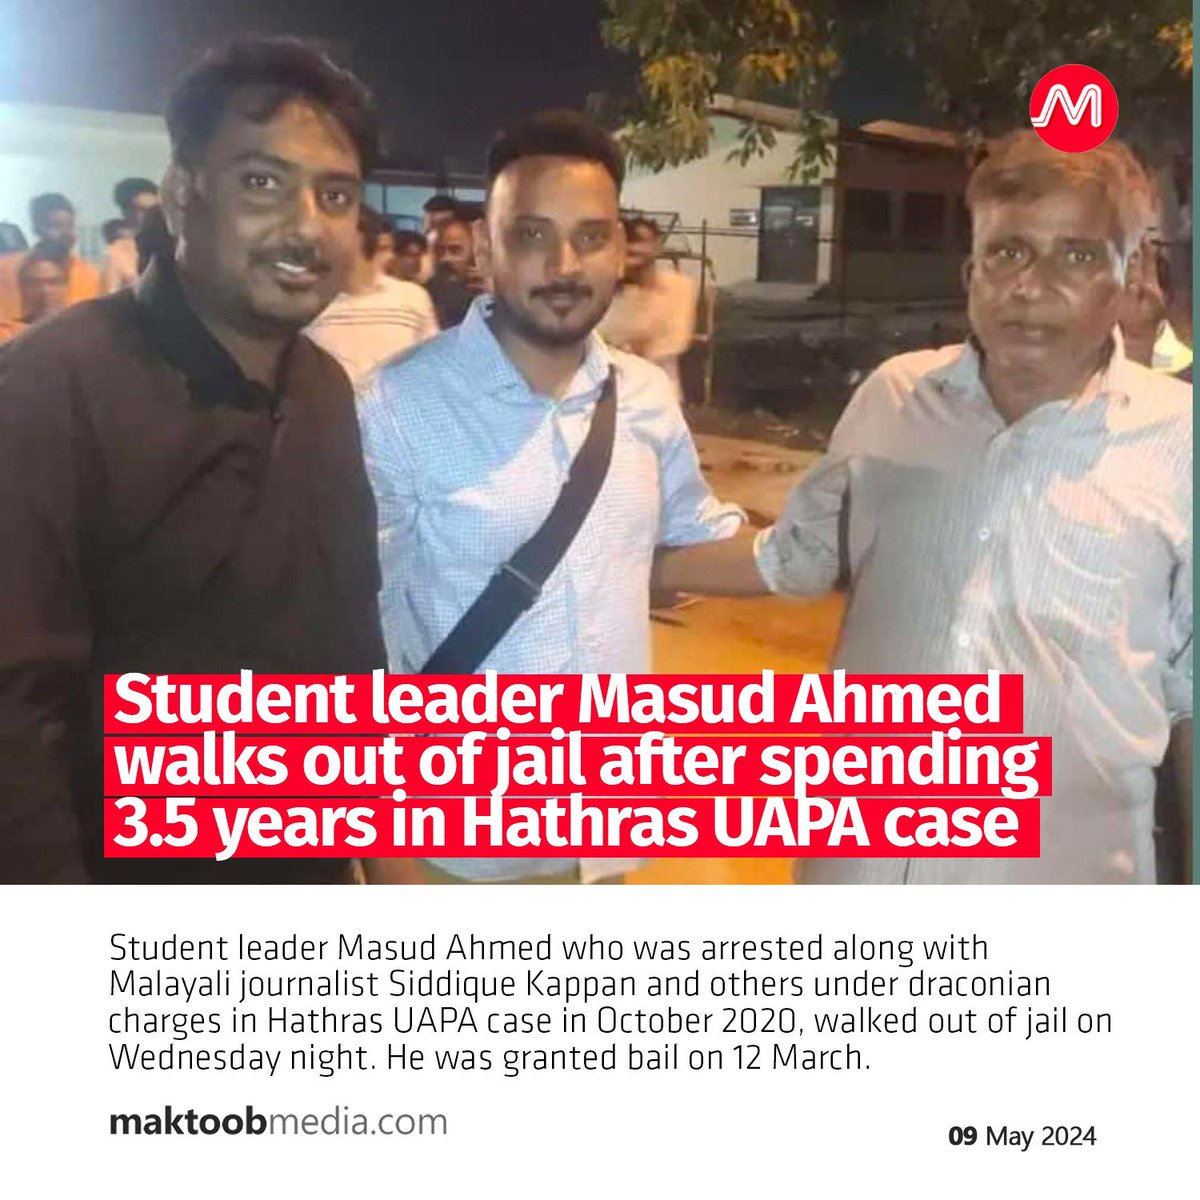 Student leader Masud Ahmed walks out of jail after spending 3.5 years in Hathras UAPA case

Student leader Masud Ahmed who was arrested along with Malayali journalist Siddique Kappan and others under draconian charges in Hathras UAPA case in October 2020, walked out of jail on…